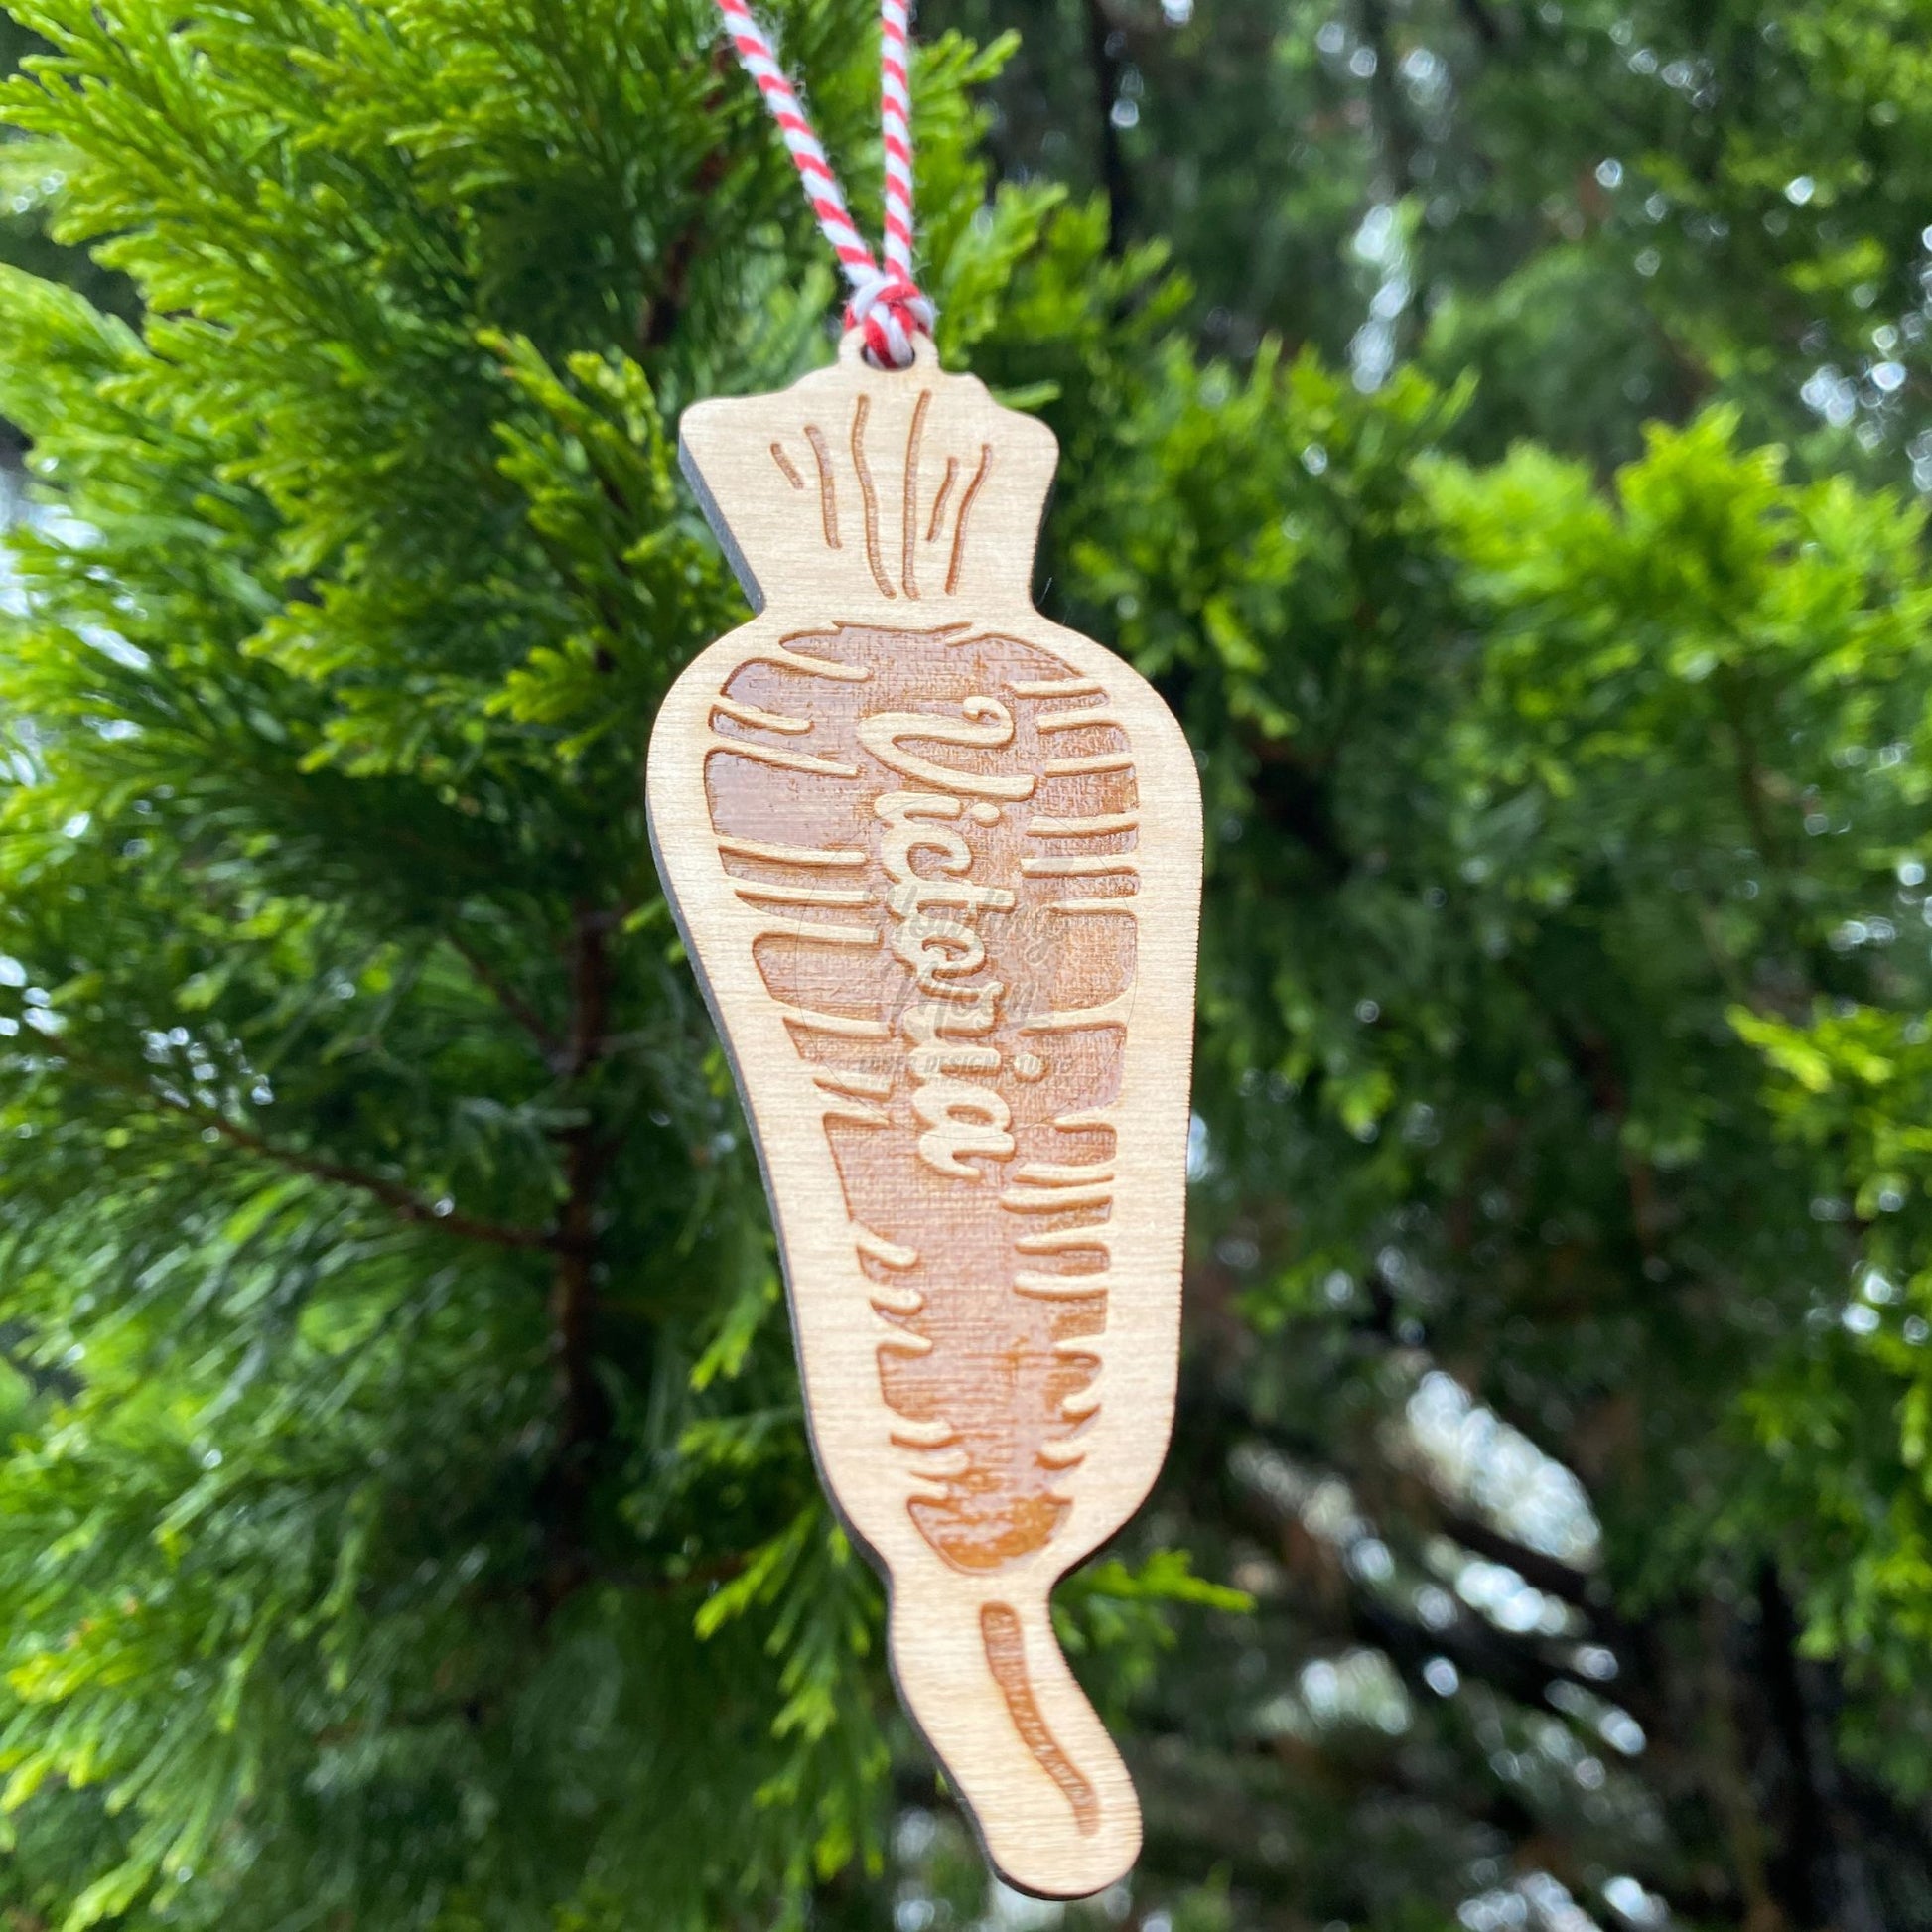 Close up of Carrot ornament hanging from tree - made by Howling Moon Laser Design in Virginia, USA